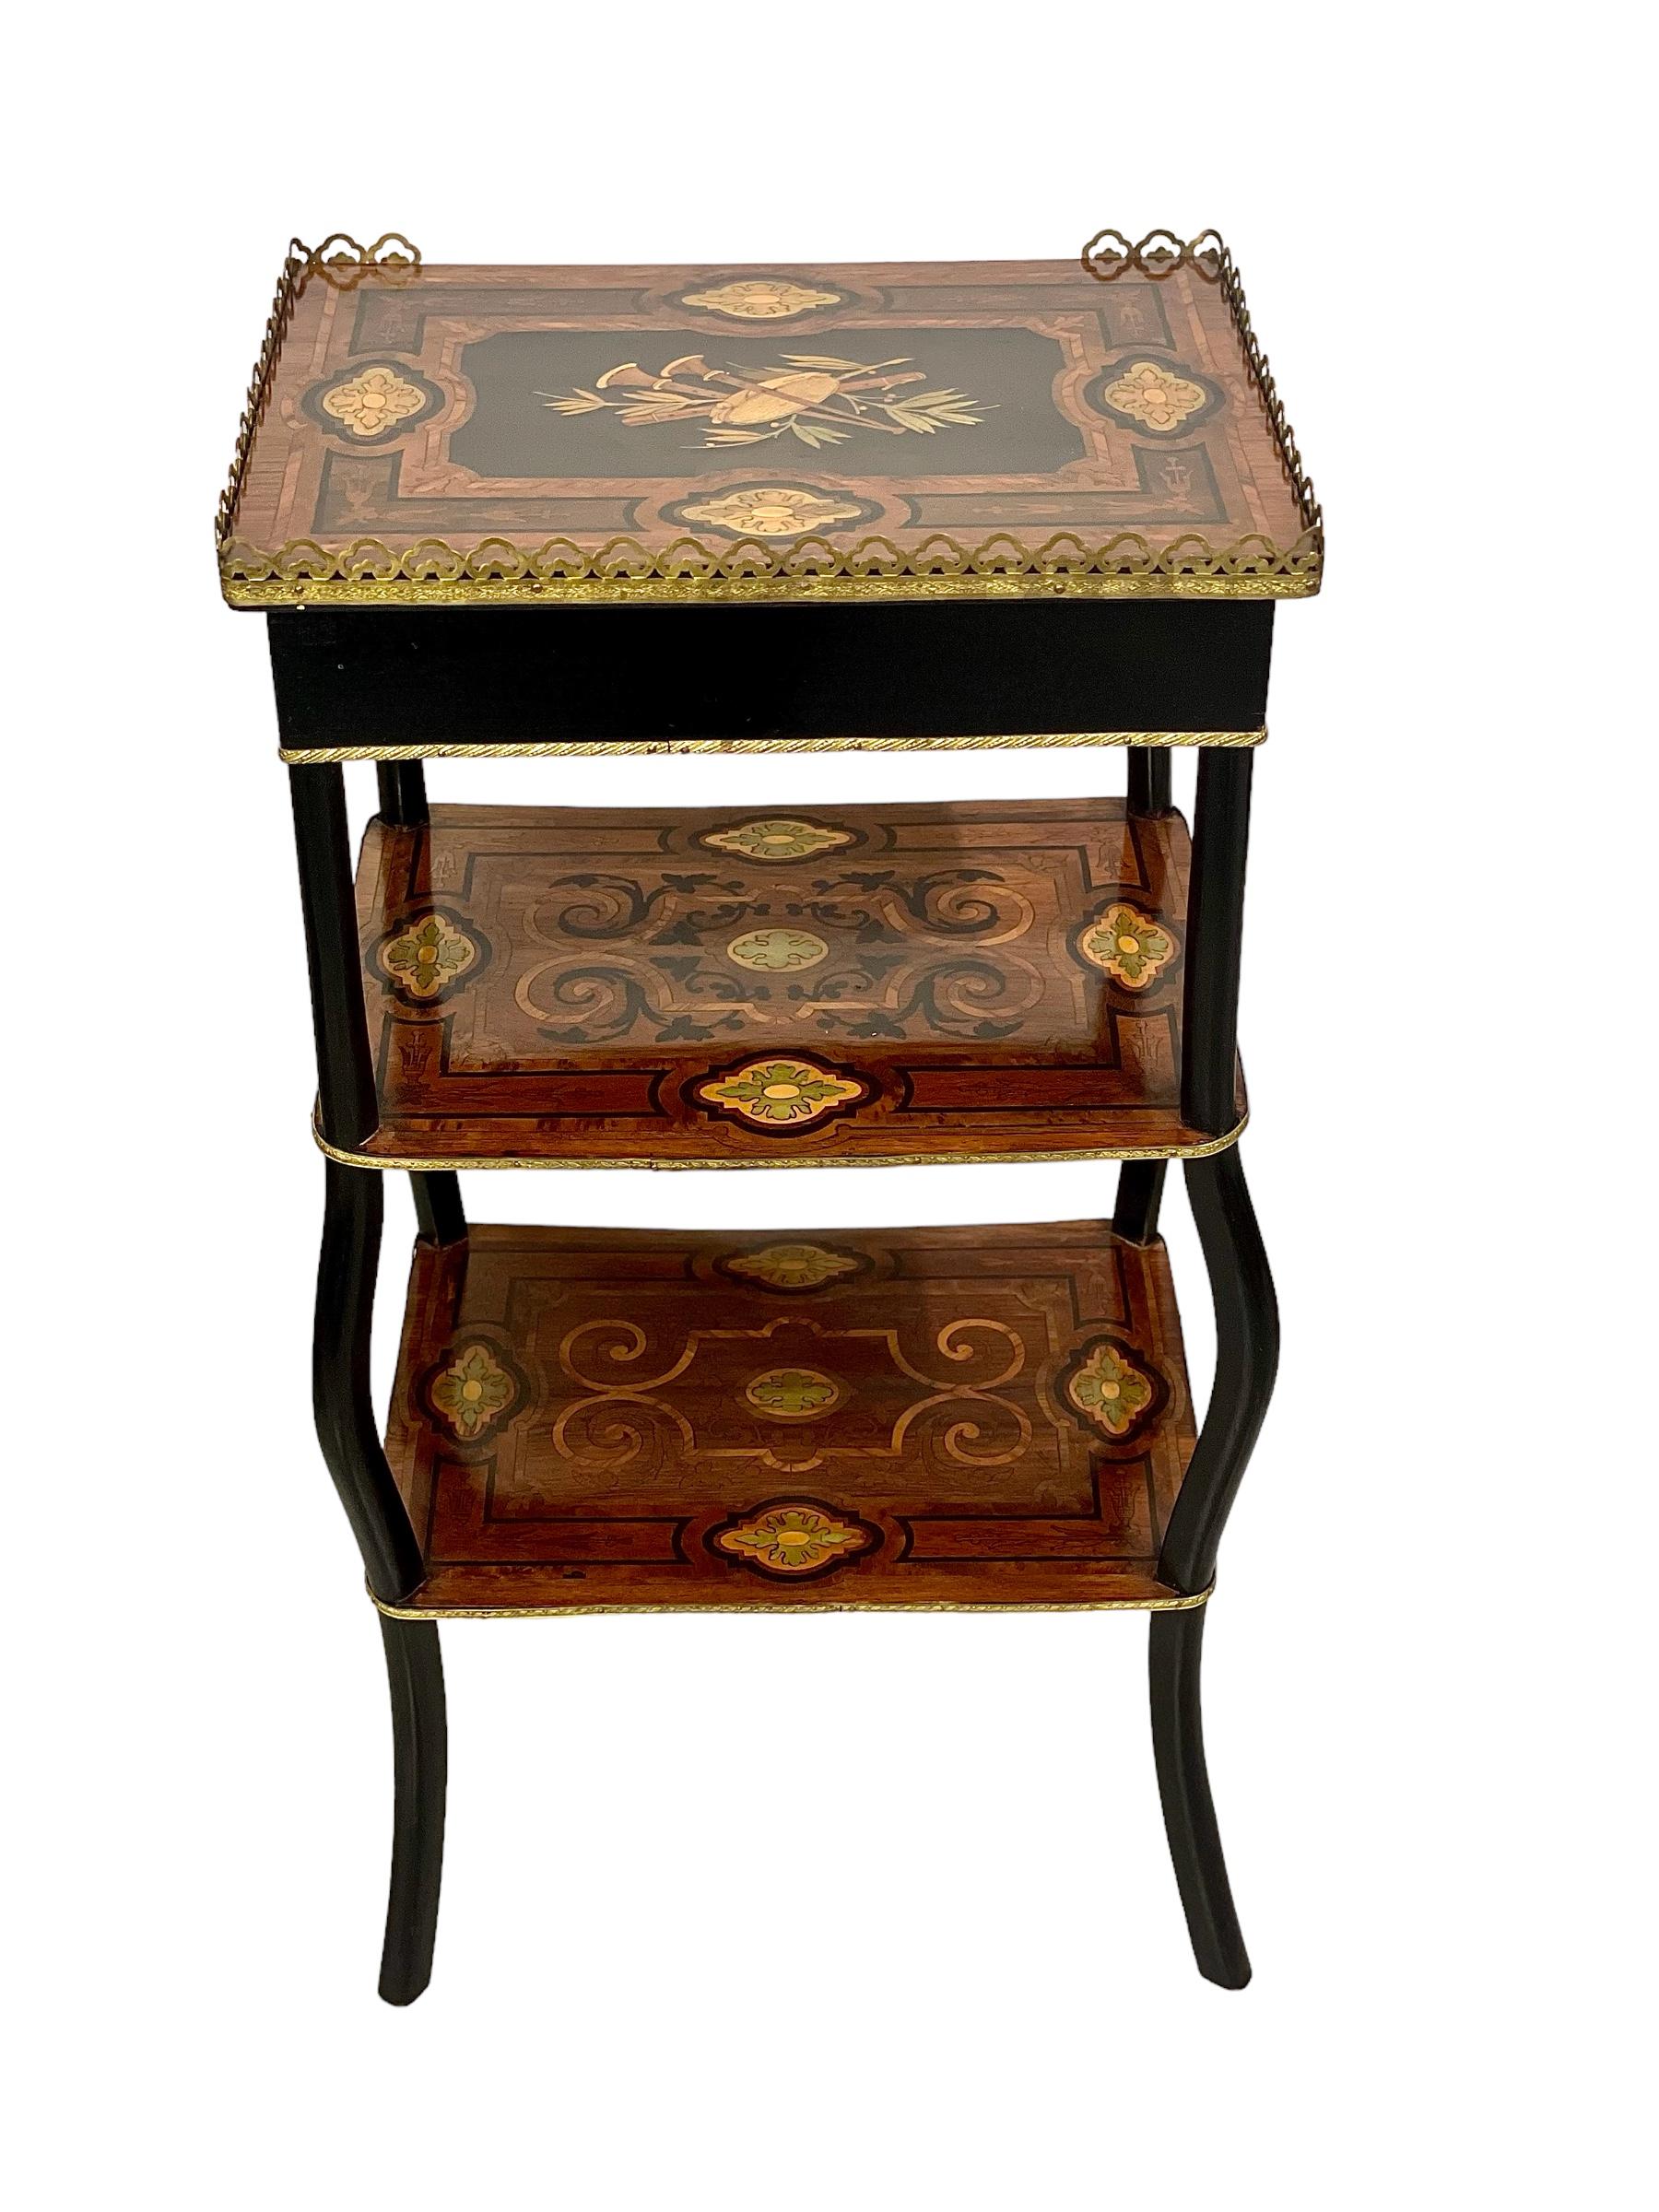 Ebonized Napoleon III Period Vanity Table or French Travailleuse For Sale